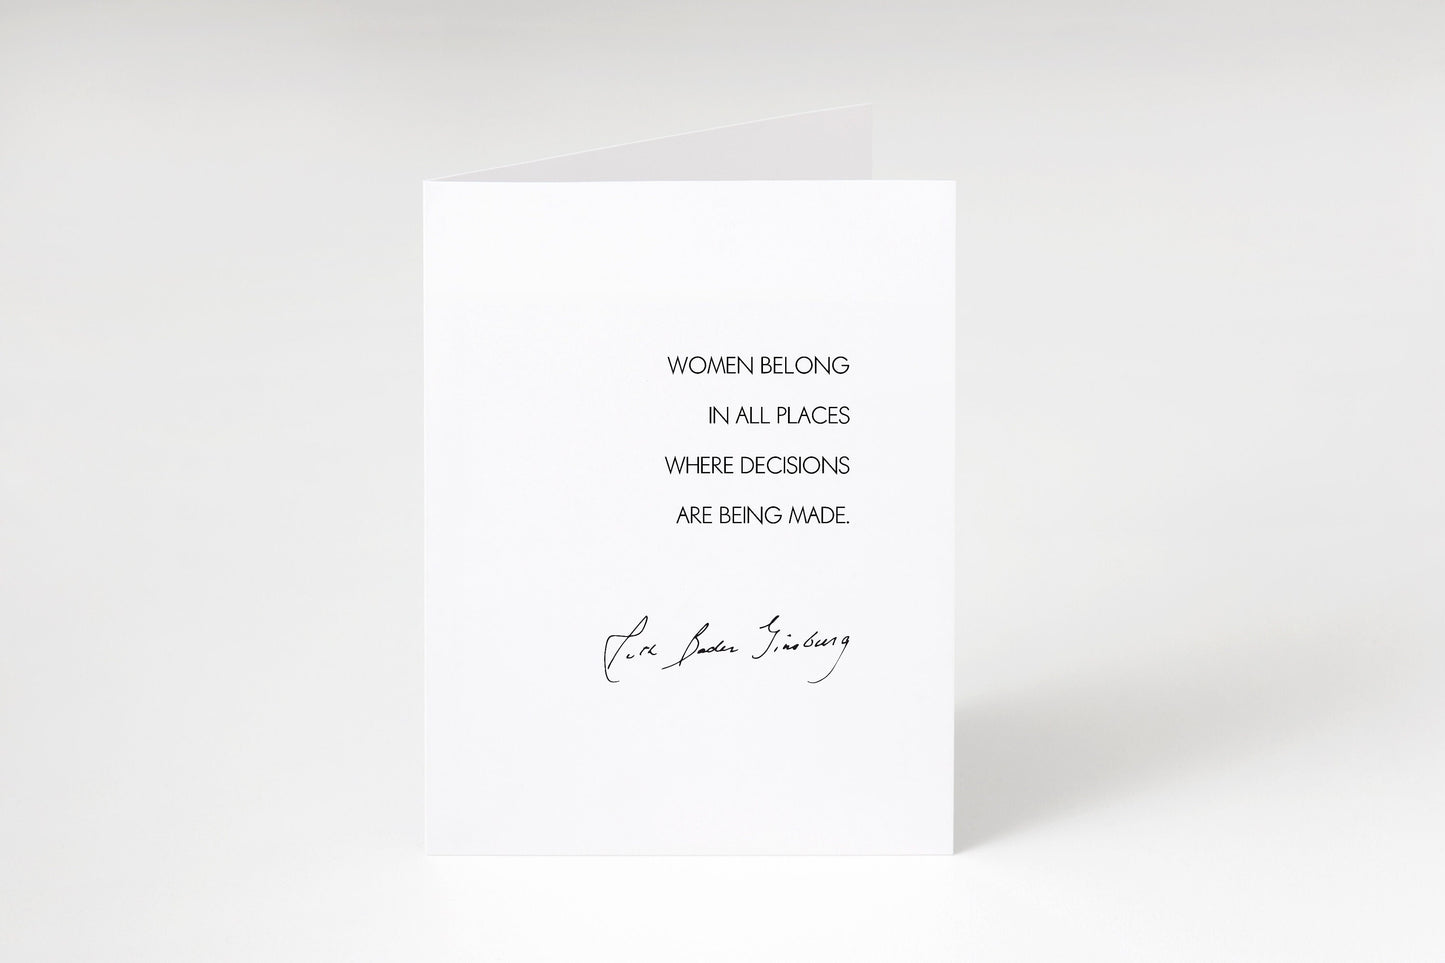 Women belong in all places where decisions are being made,Ruth Bader Ginsburg greeting card,RBG quote card,RBG stationery,Feminist card